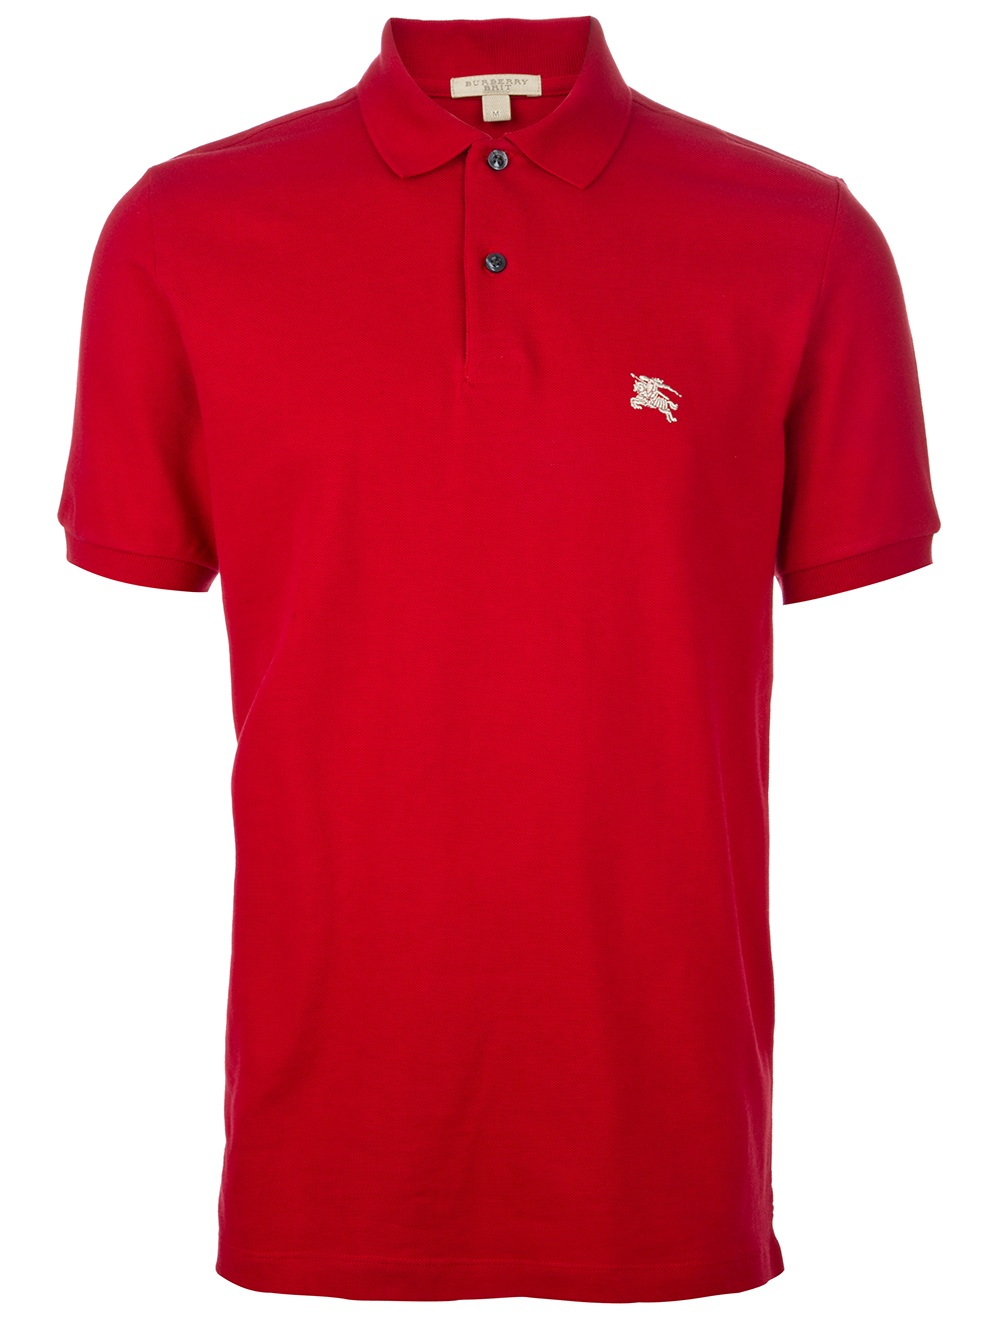 Lyst - Burberry Brit Classic Polo Shirt in Red for Men